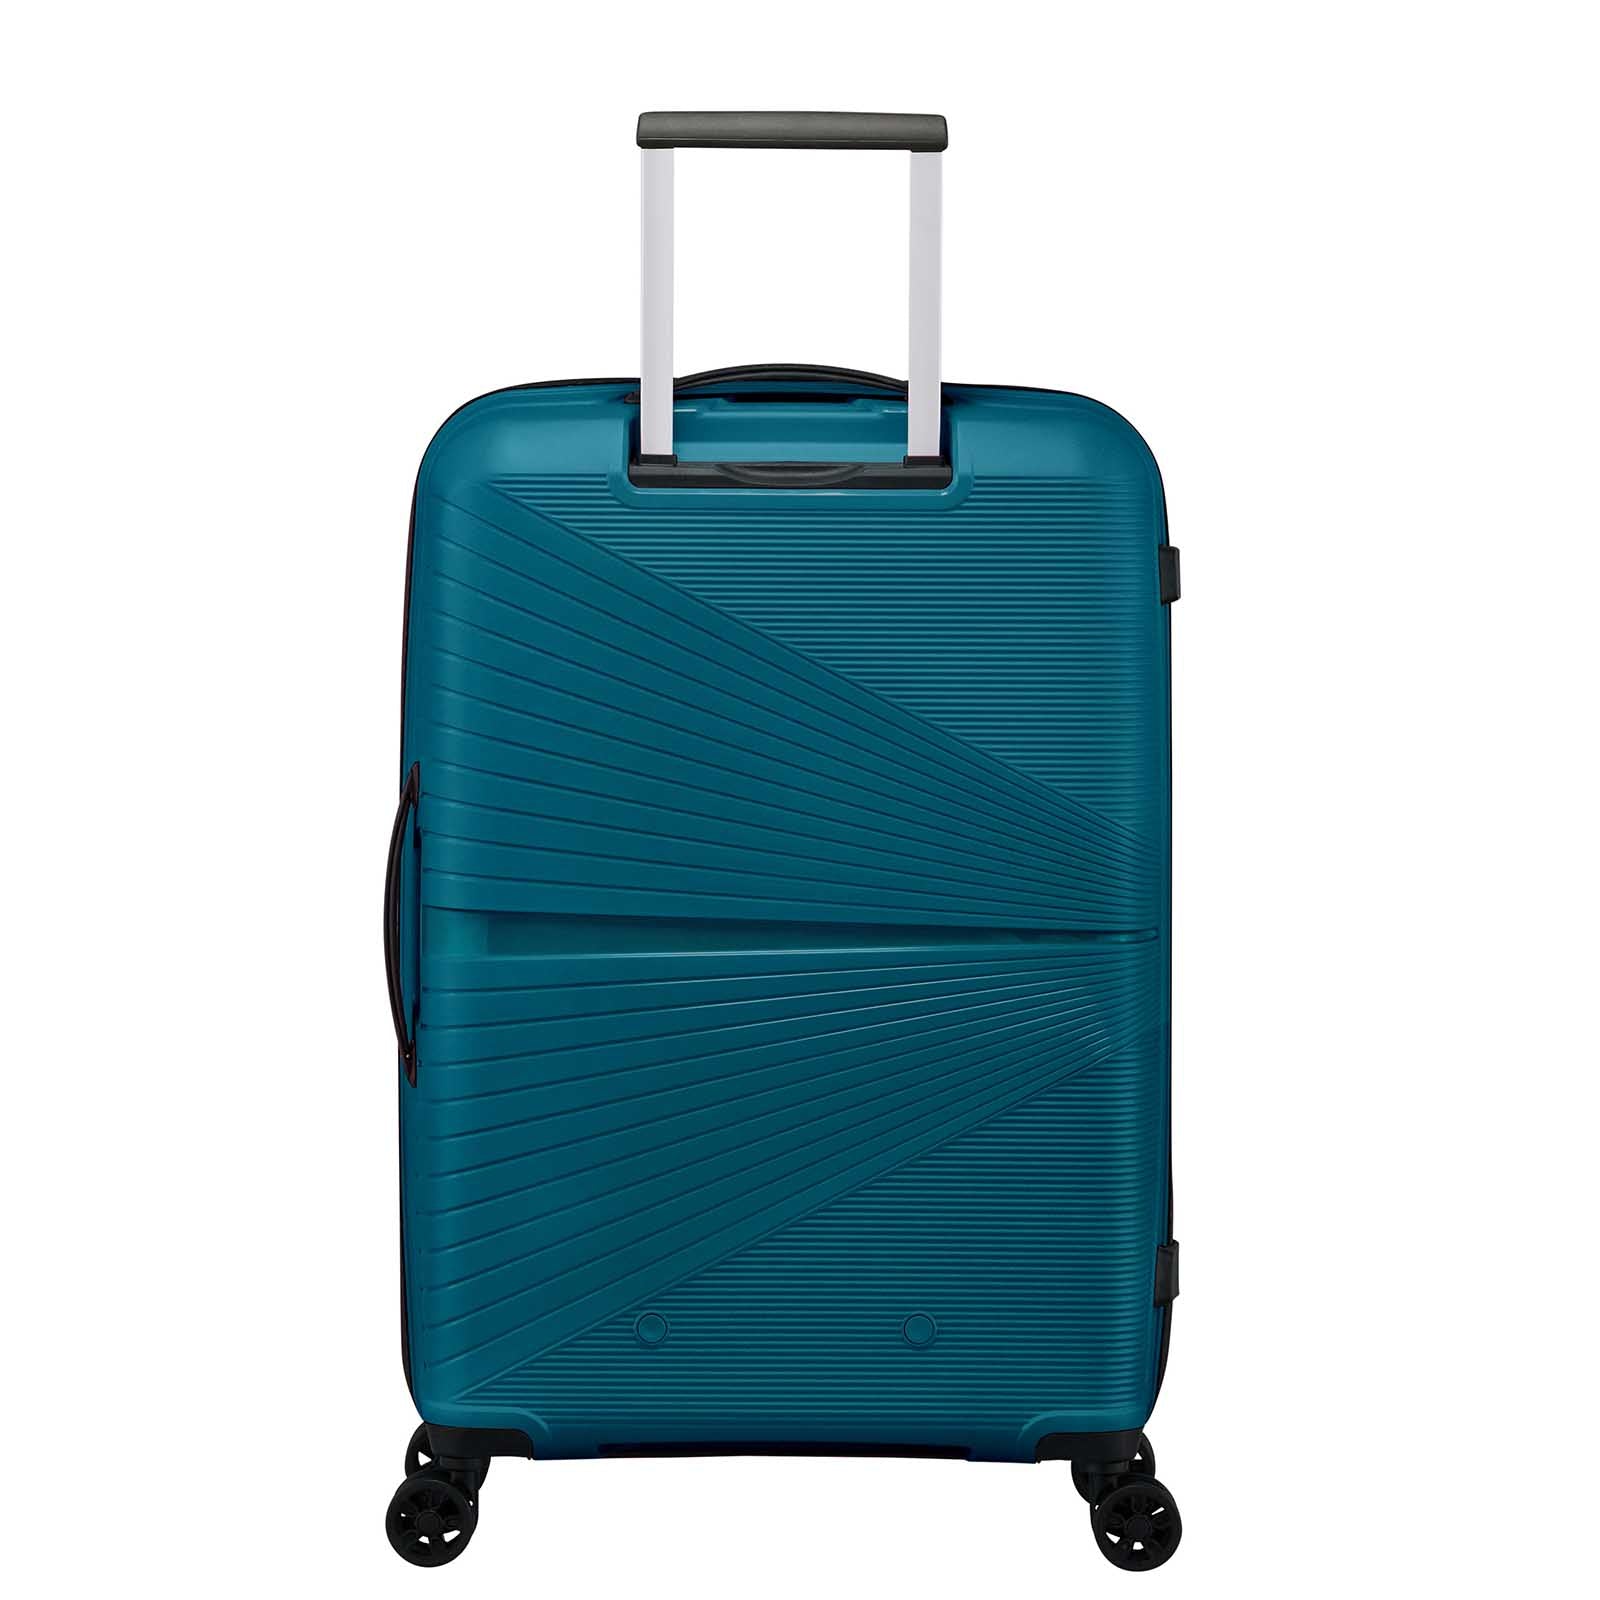 American-Tourister-Airconic-67cm-Suitcase-Deep-Ocean-Back